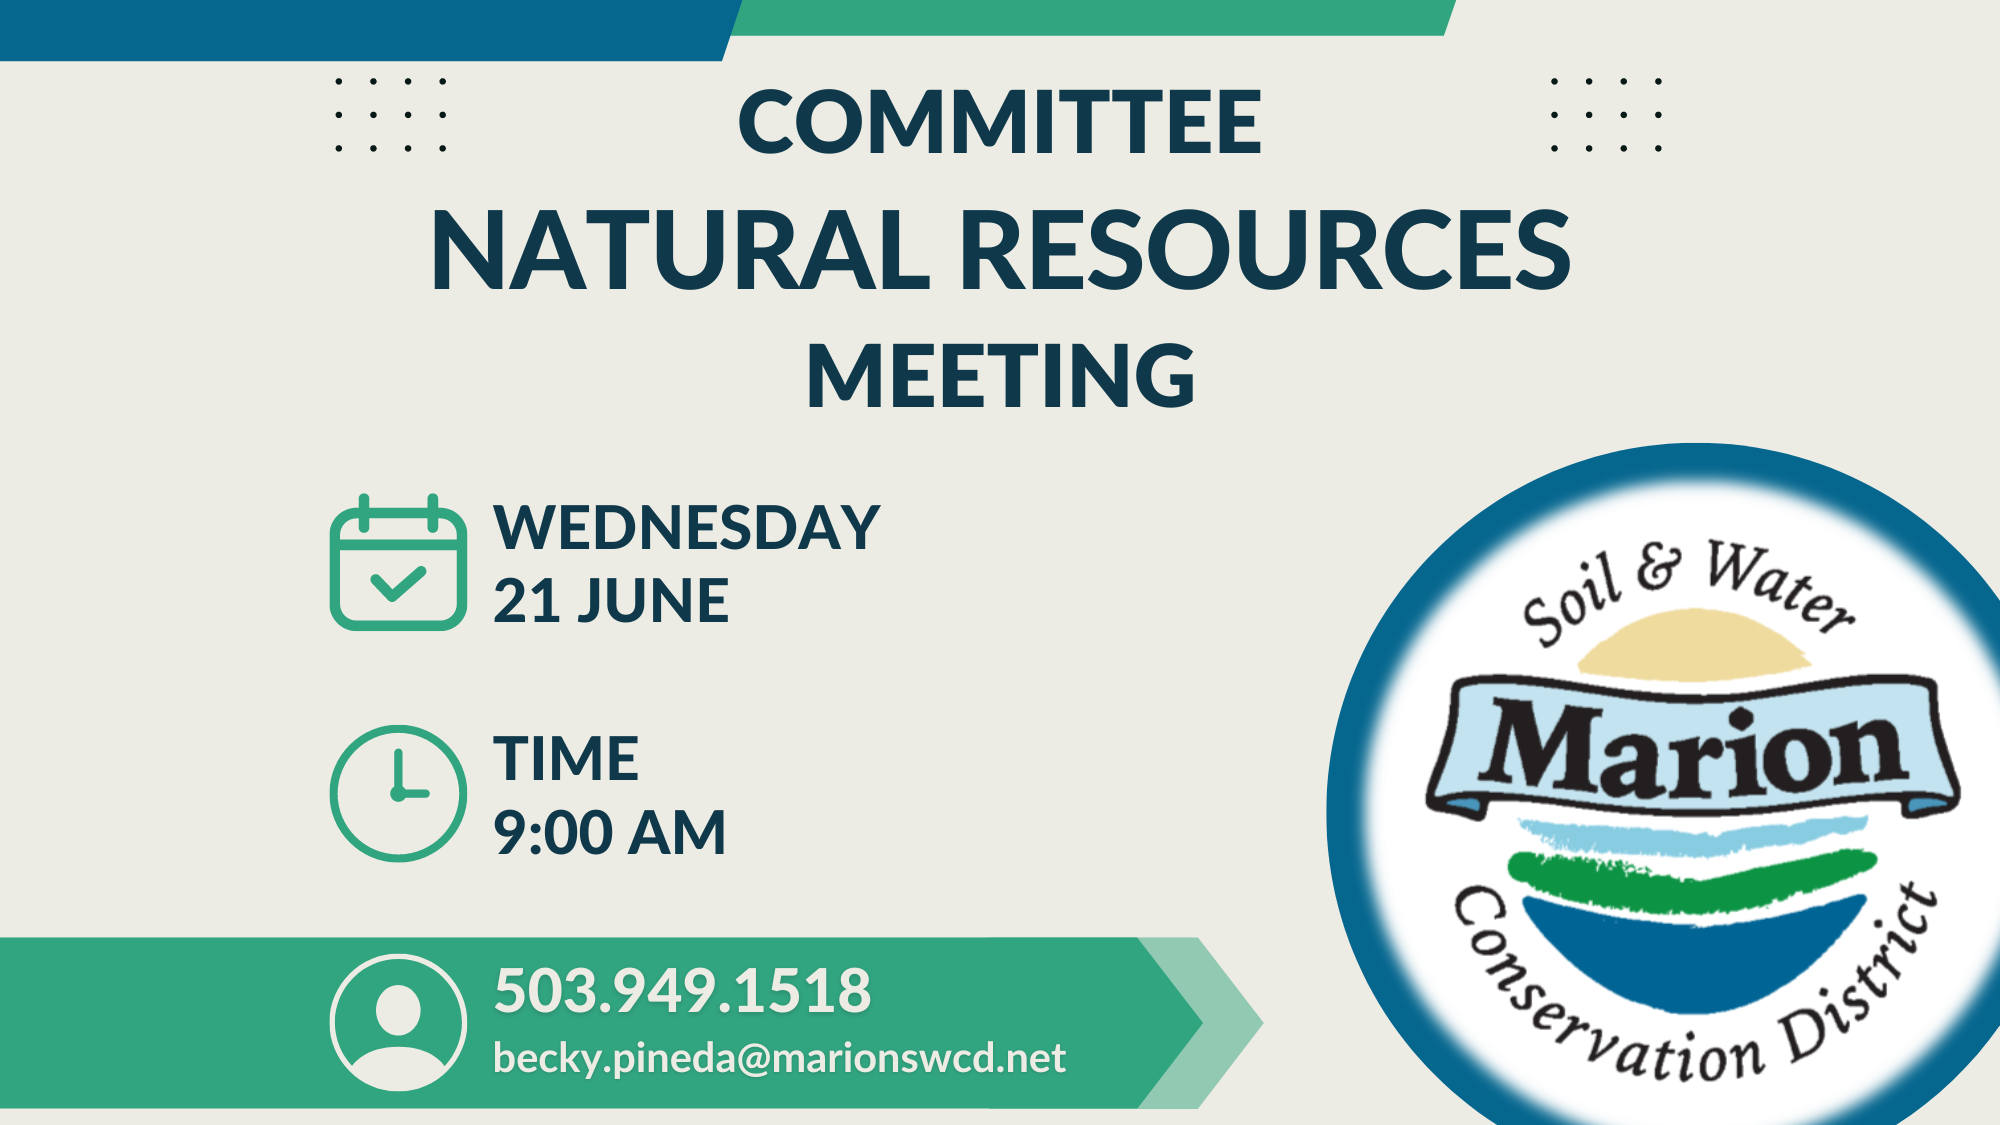 A graphic announcing the Natural Resources Committee meeting on June 21 at 9 am. Contact becky.pineda@marionswcd.net or call 503-949-1518.